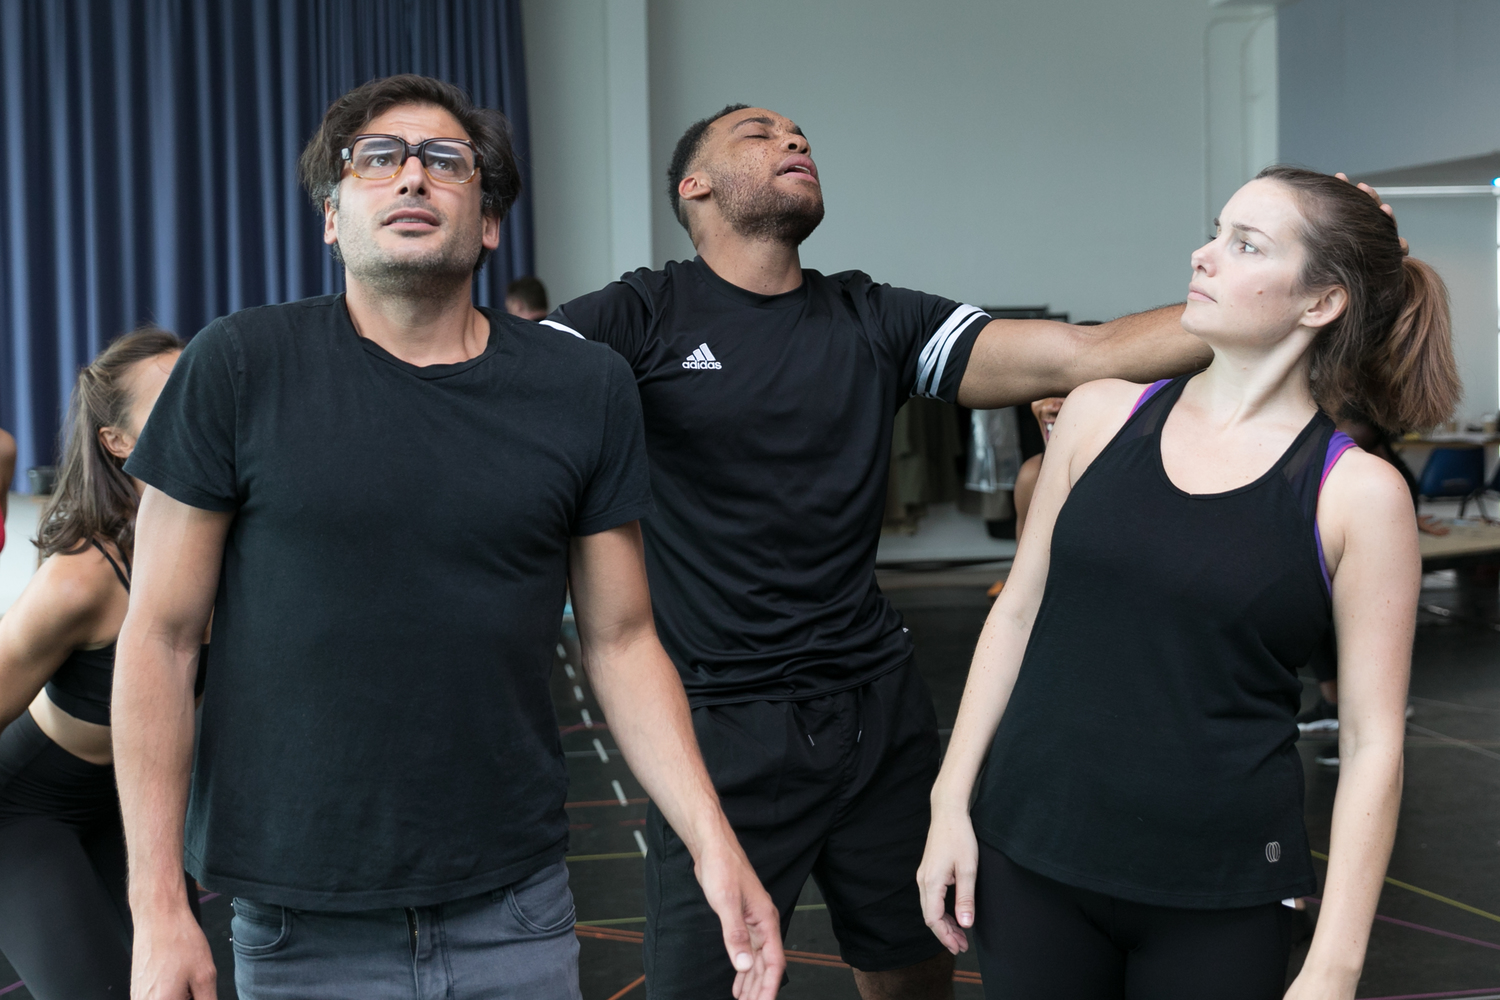 Sweet Charity in Rehearsal, photography by Darren Bell